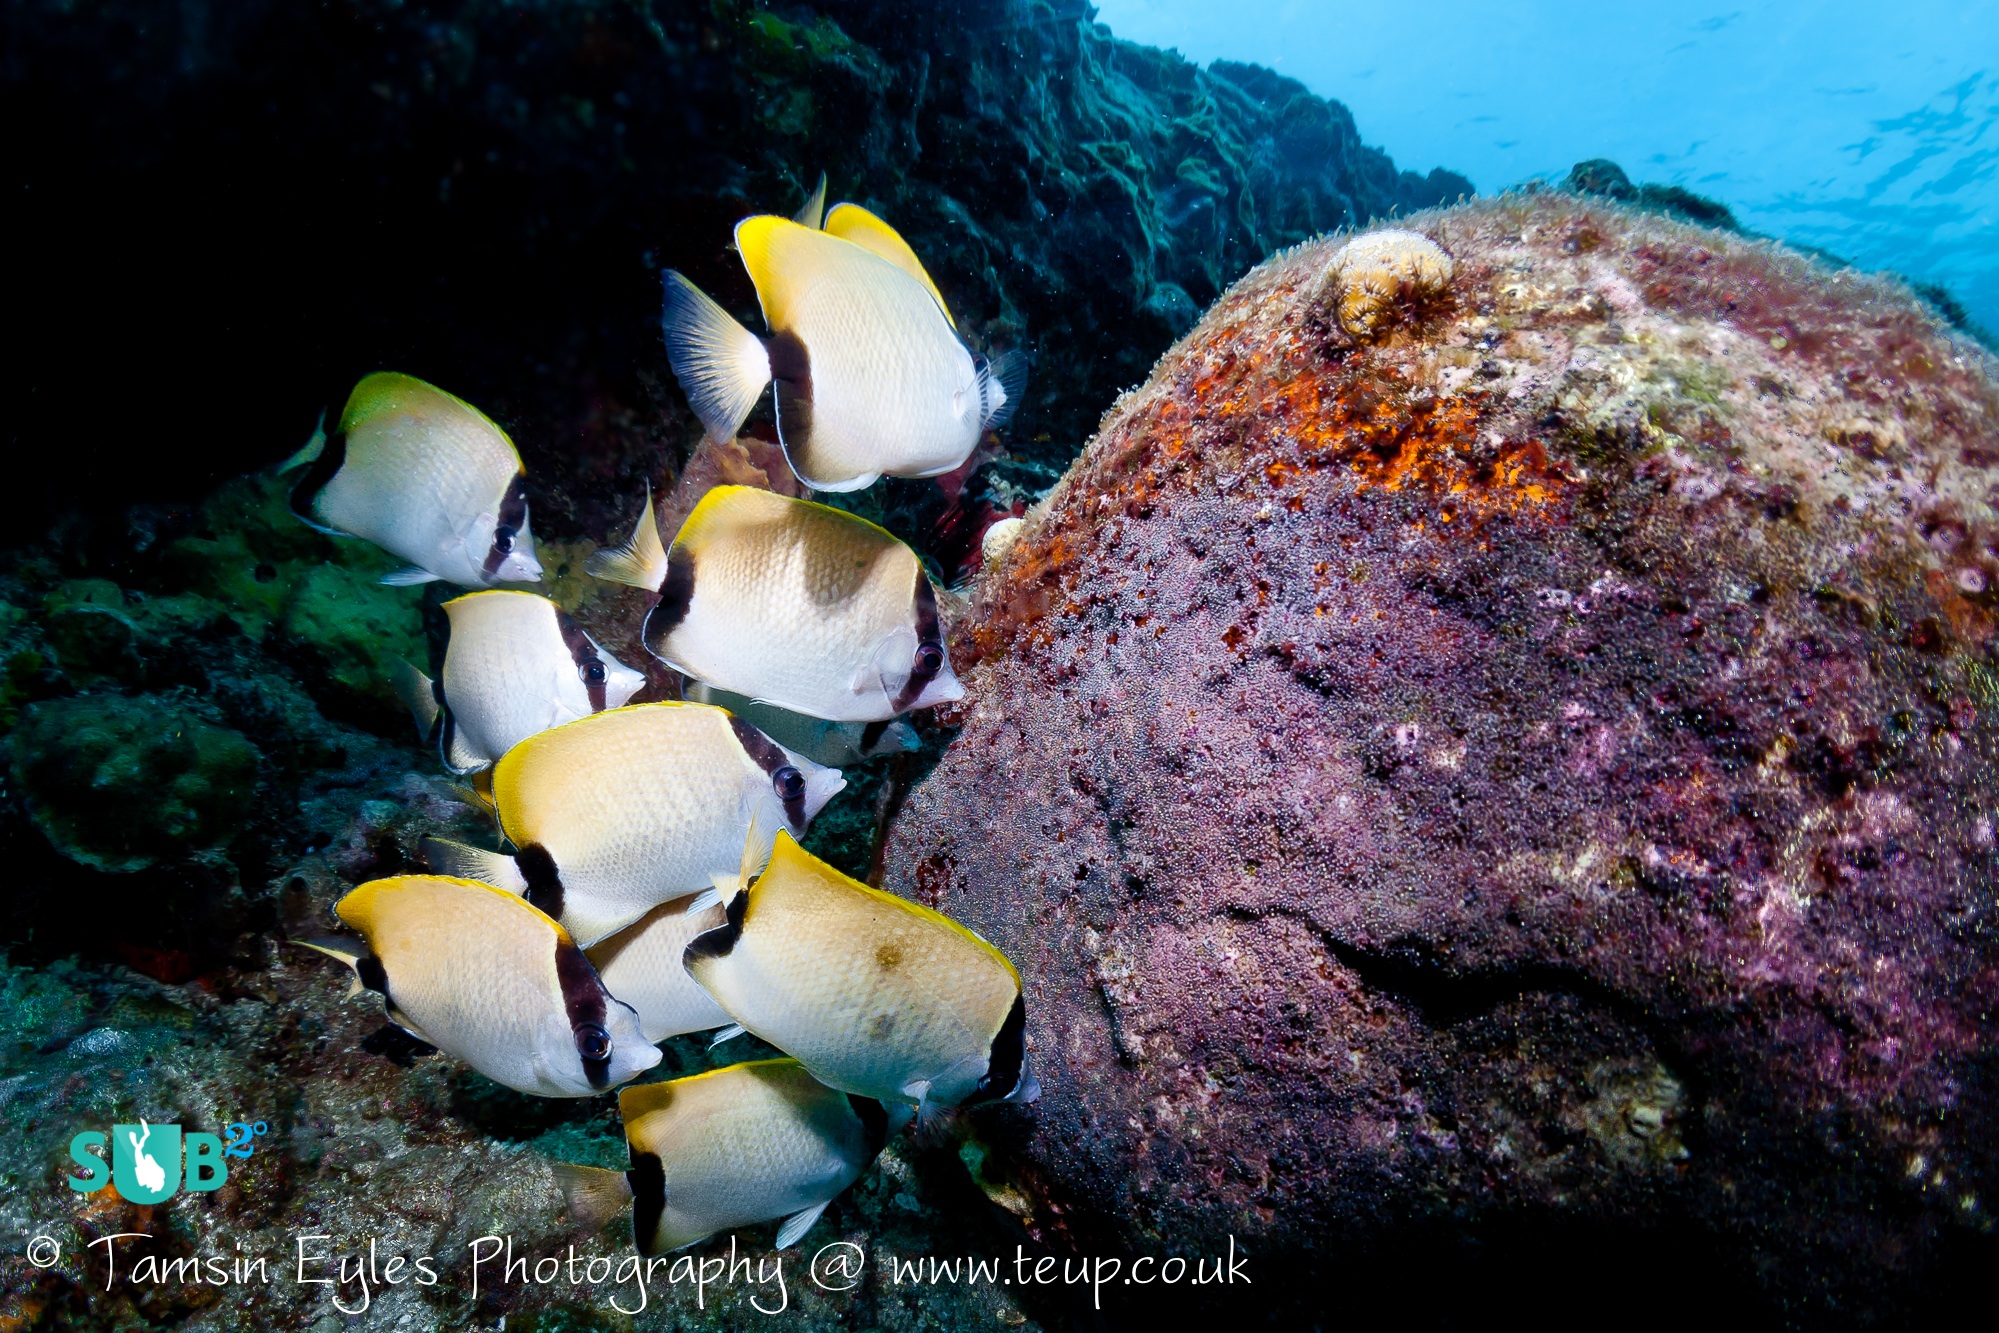 These feisty reef butterflyfish were caught eating the sergeant major's purple eggs. Photo courtesy of Tamsin Eyles.